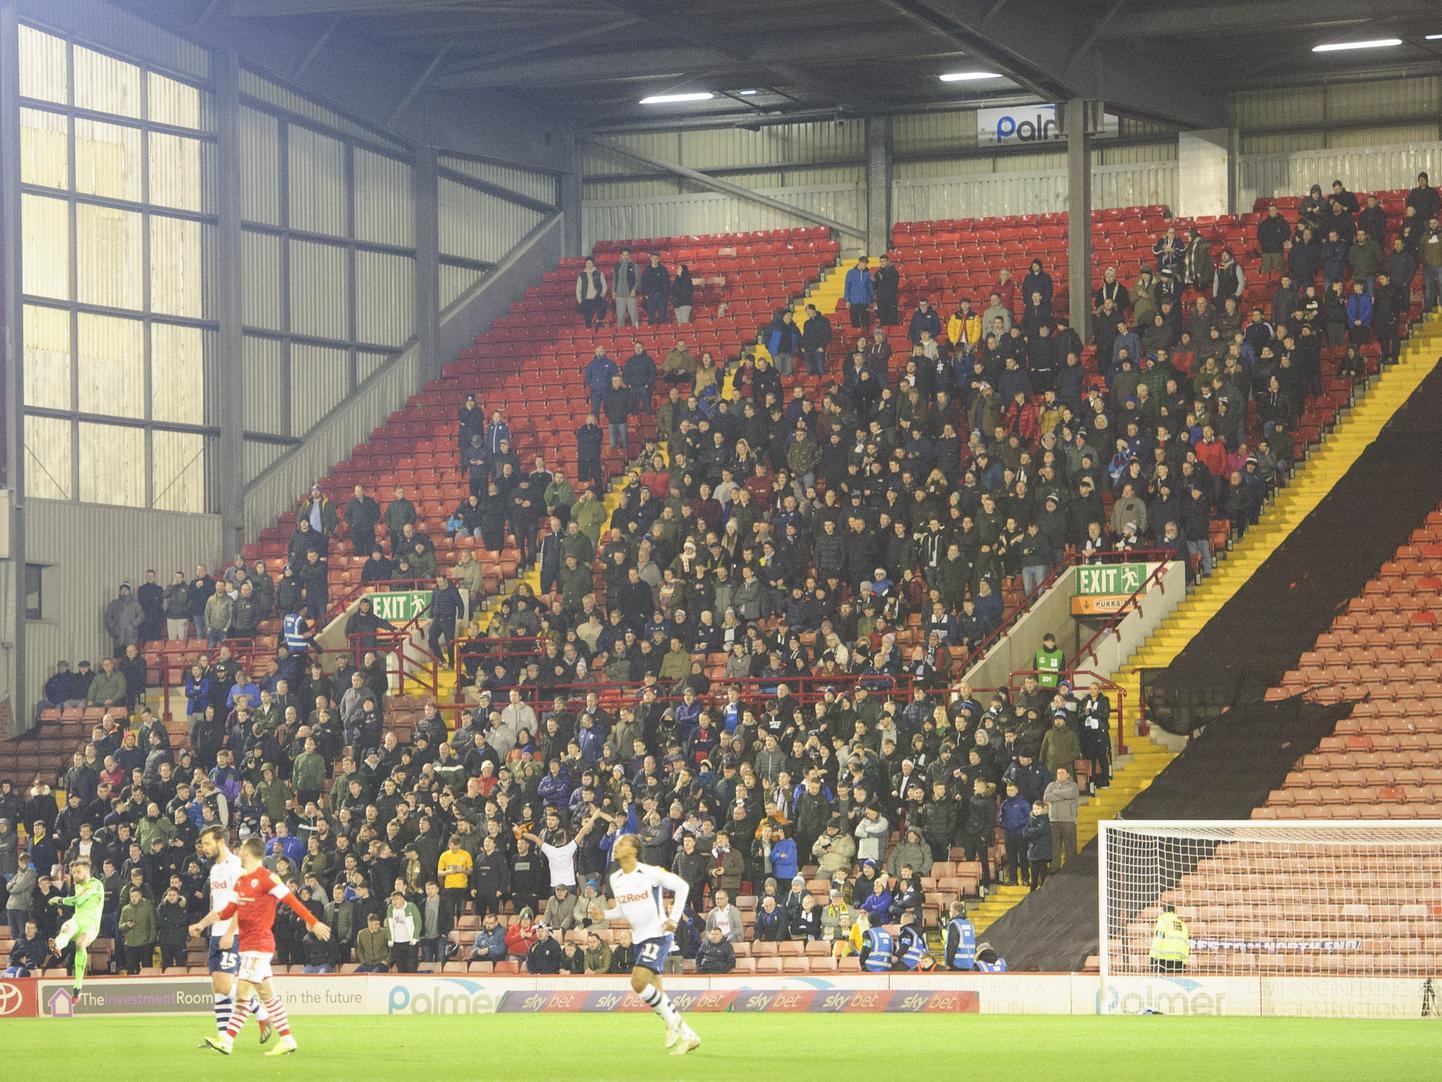 The full view of the 679 PNE fans that made the trip to Barnsley.